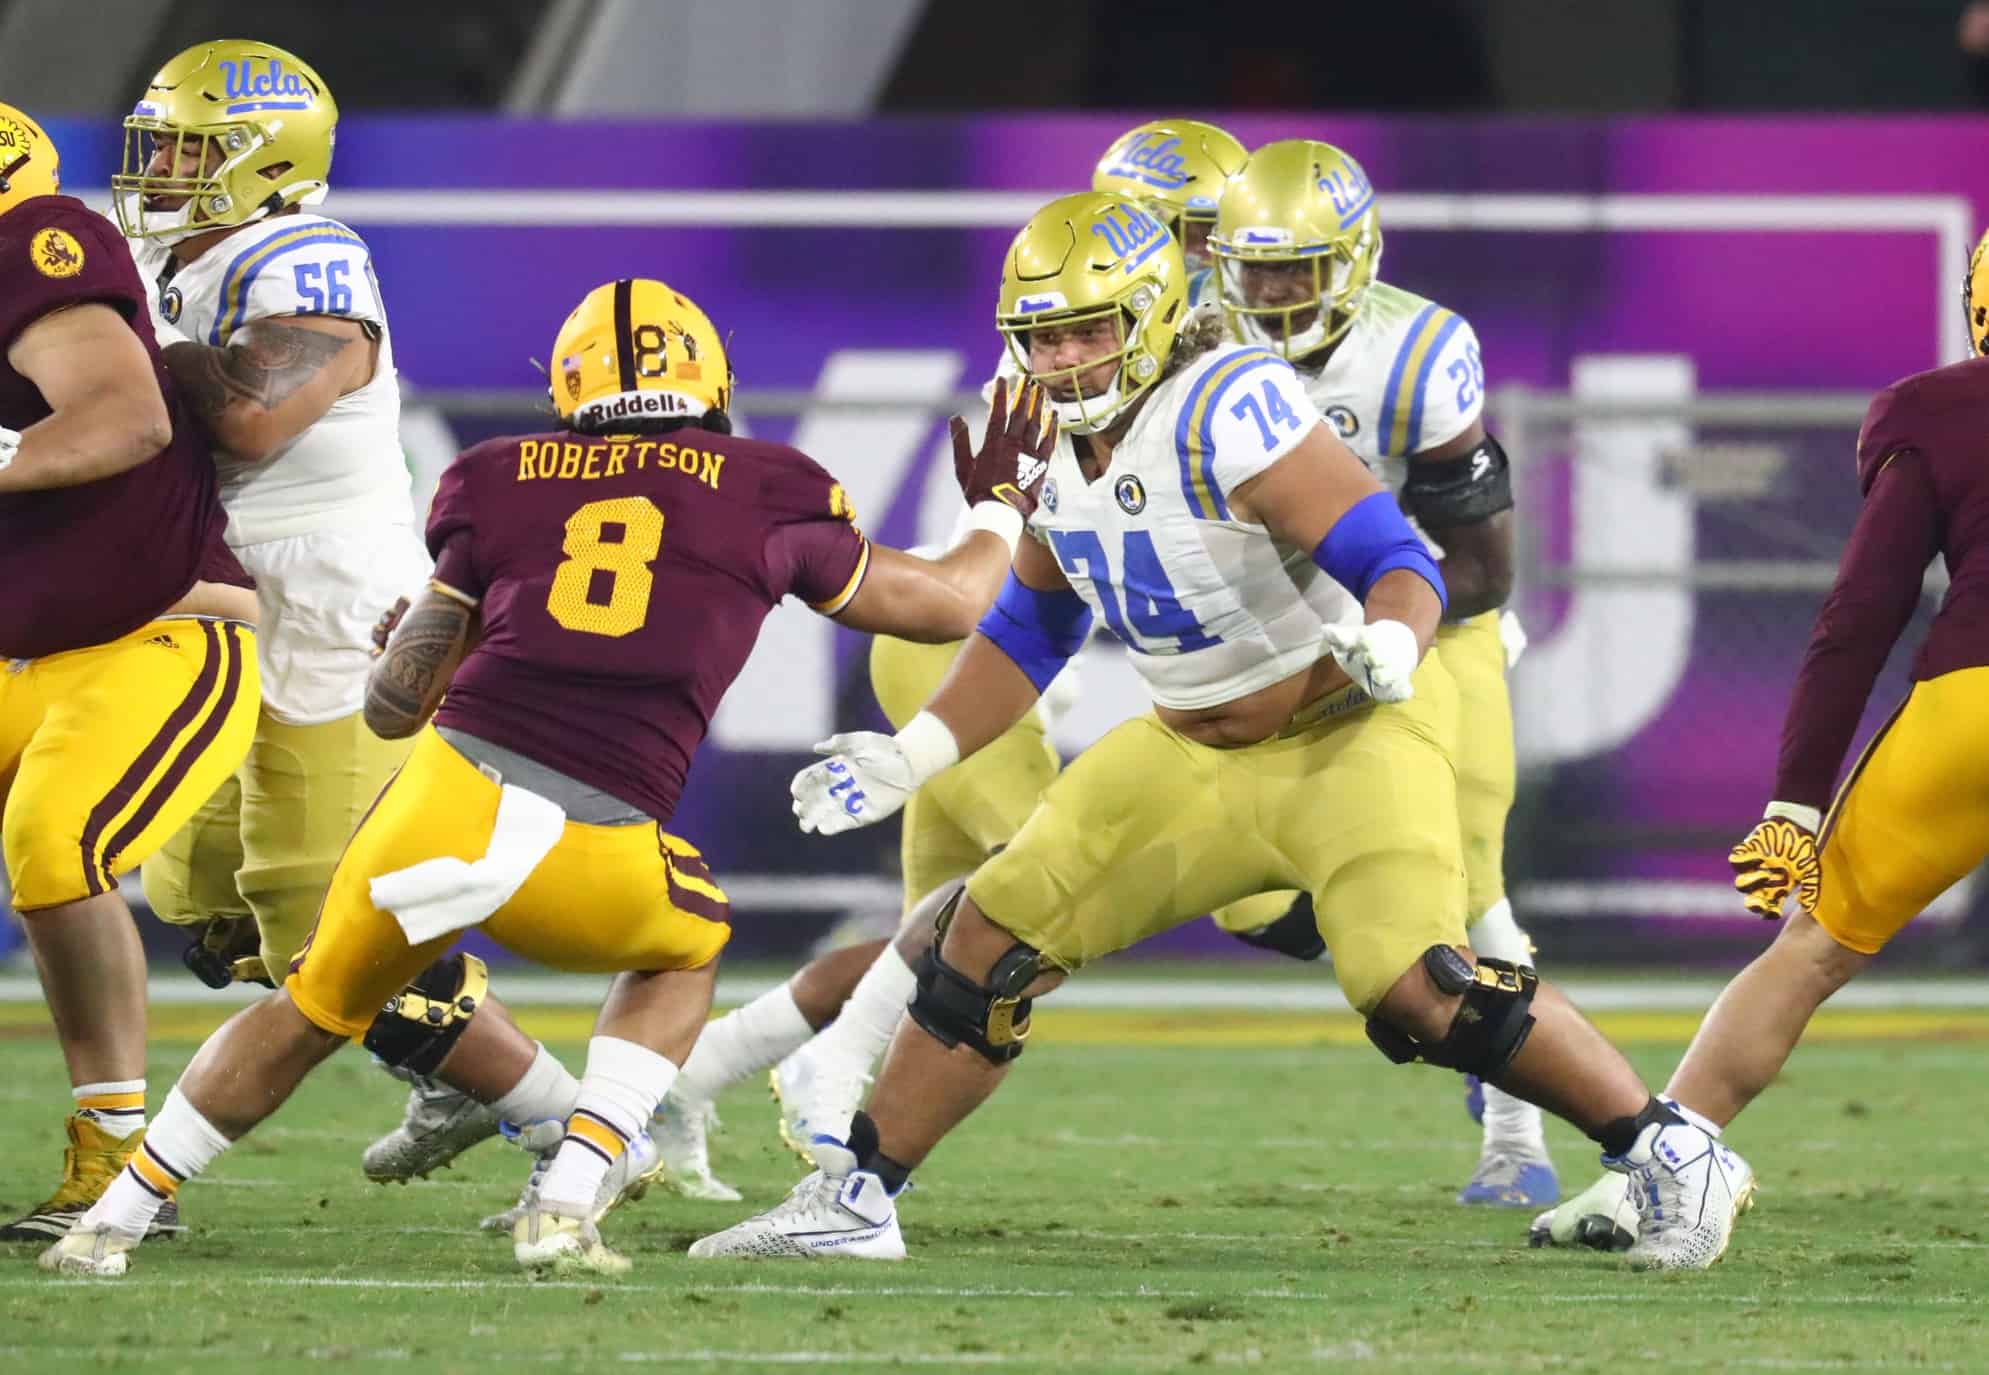 UCLA 2022 NFL Draft Scouting Reports include Kyle Philips and Sean